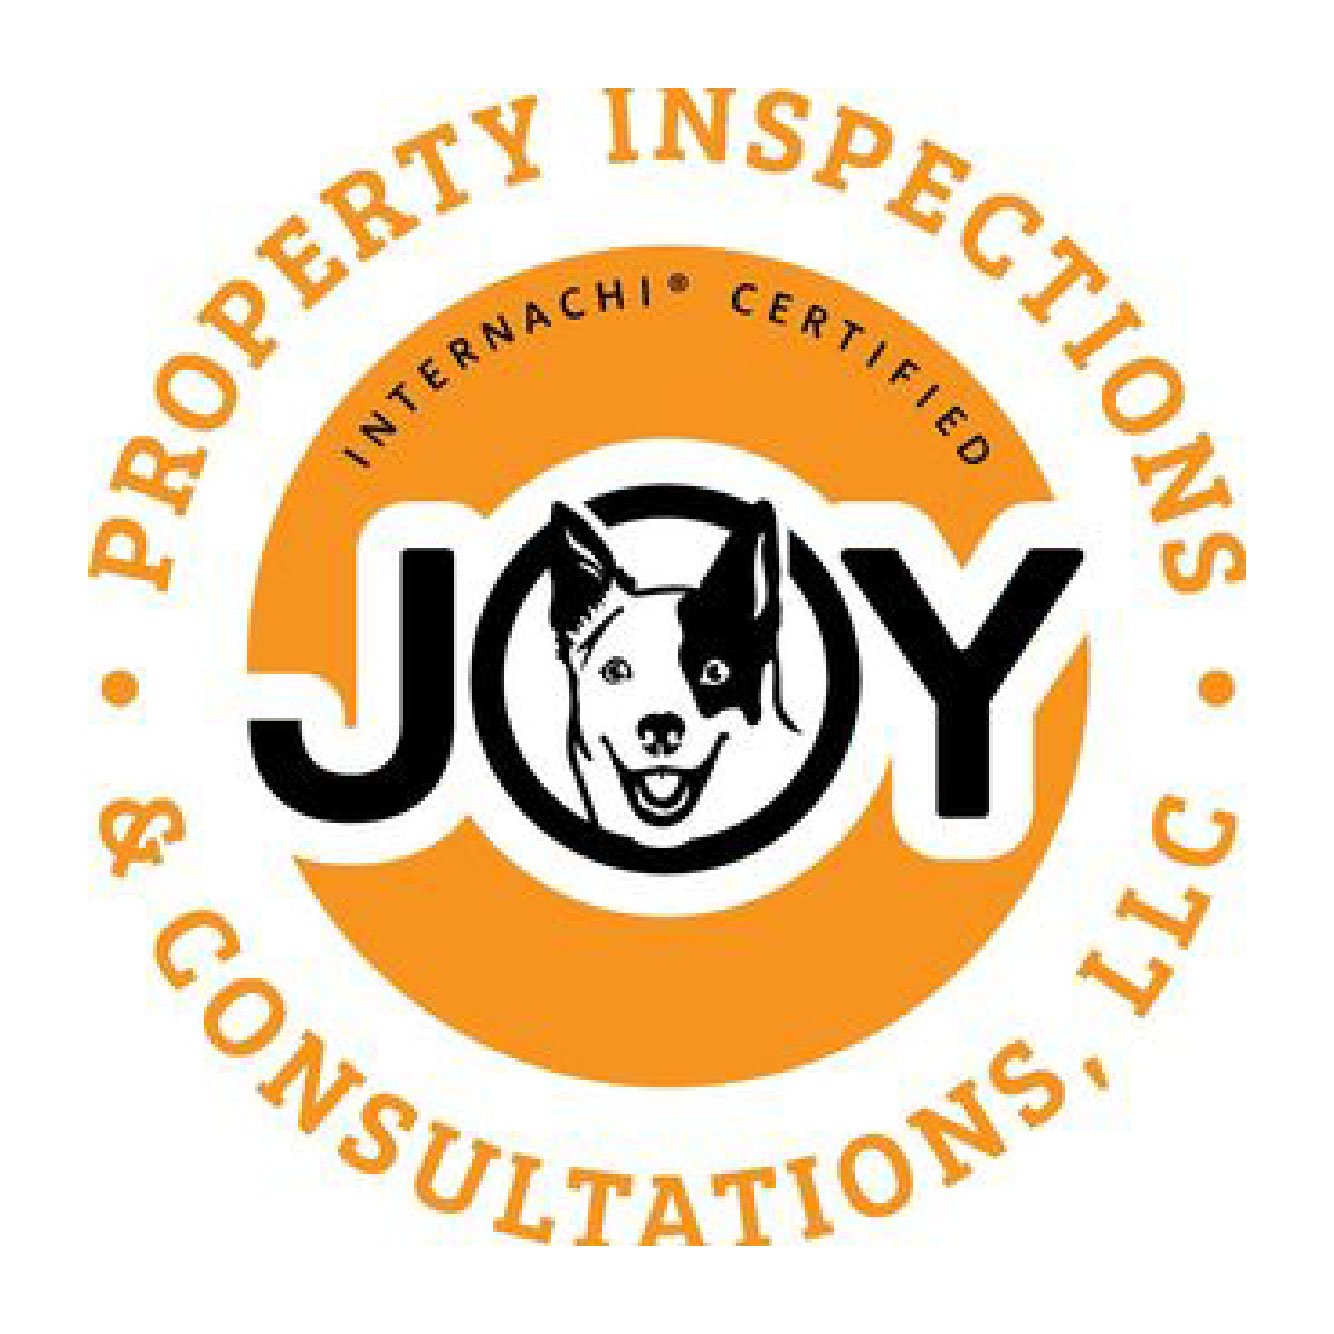 My name’s Frank Emery, and I’m certified in every type of residential home inspection including pre-listing inspections, roof inspections, and more.